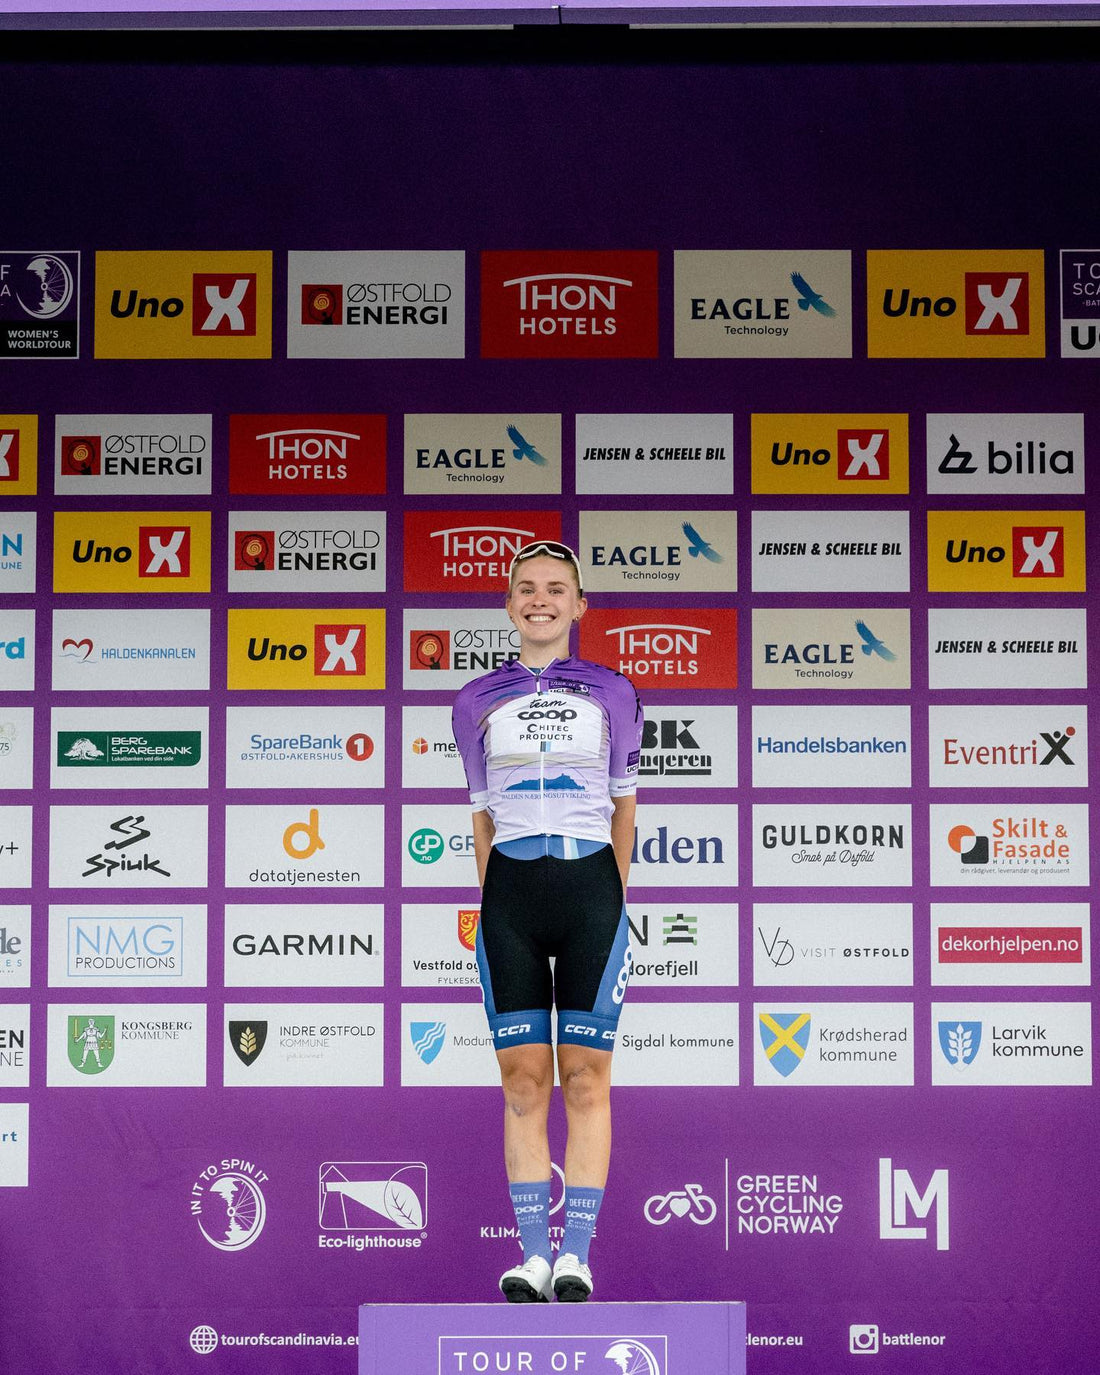 Tiril Piril's Triumph: Stage 1 Highlights of Tour of Scandinavia